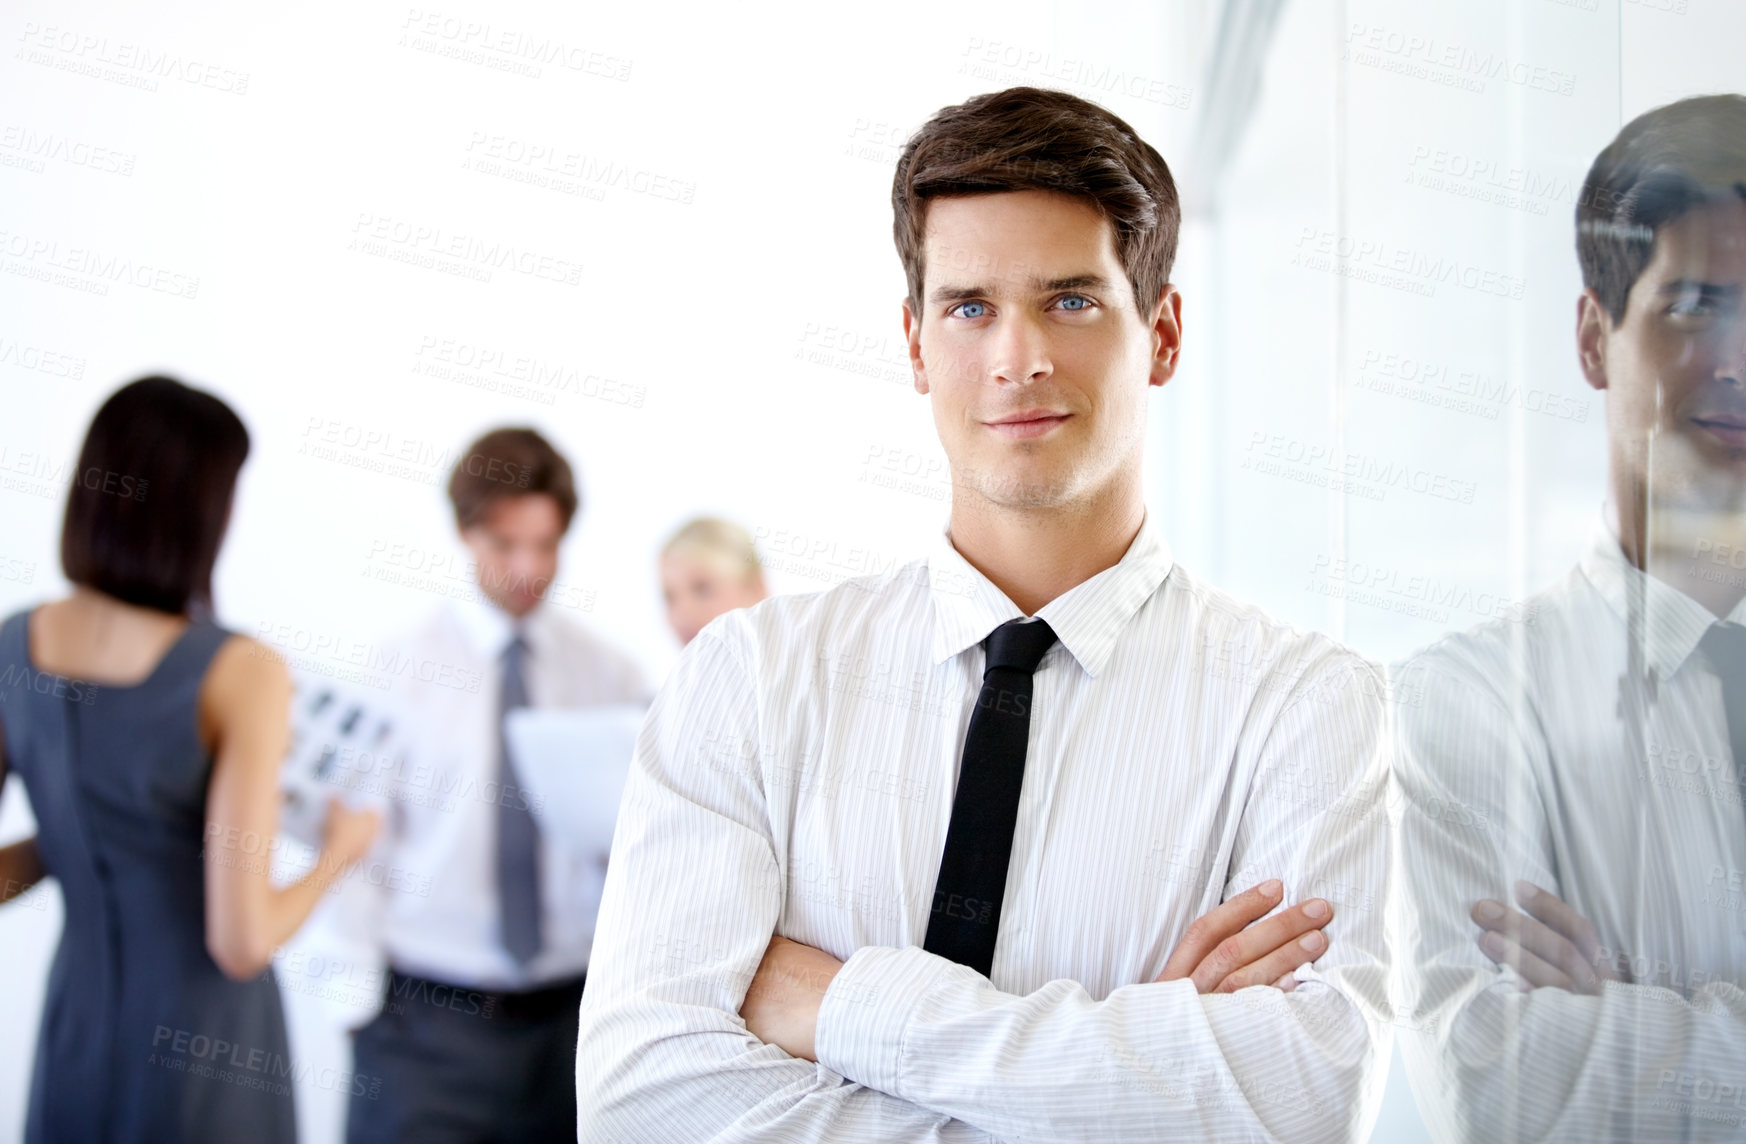 Buy stock photo Portrait of a handsome executive with his arms folded - blurred colleagues in the background